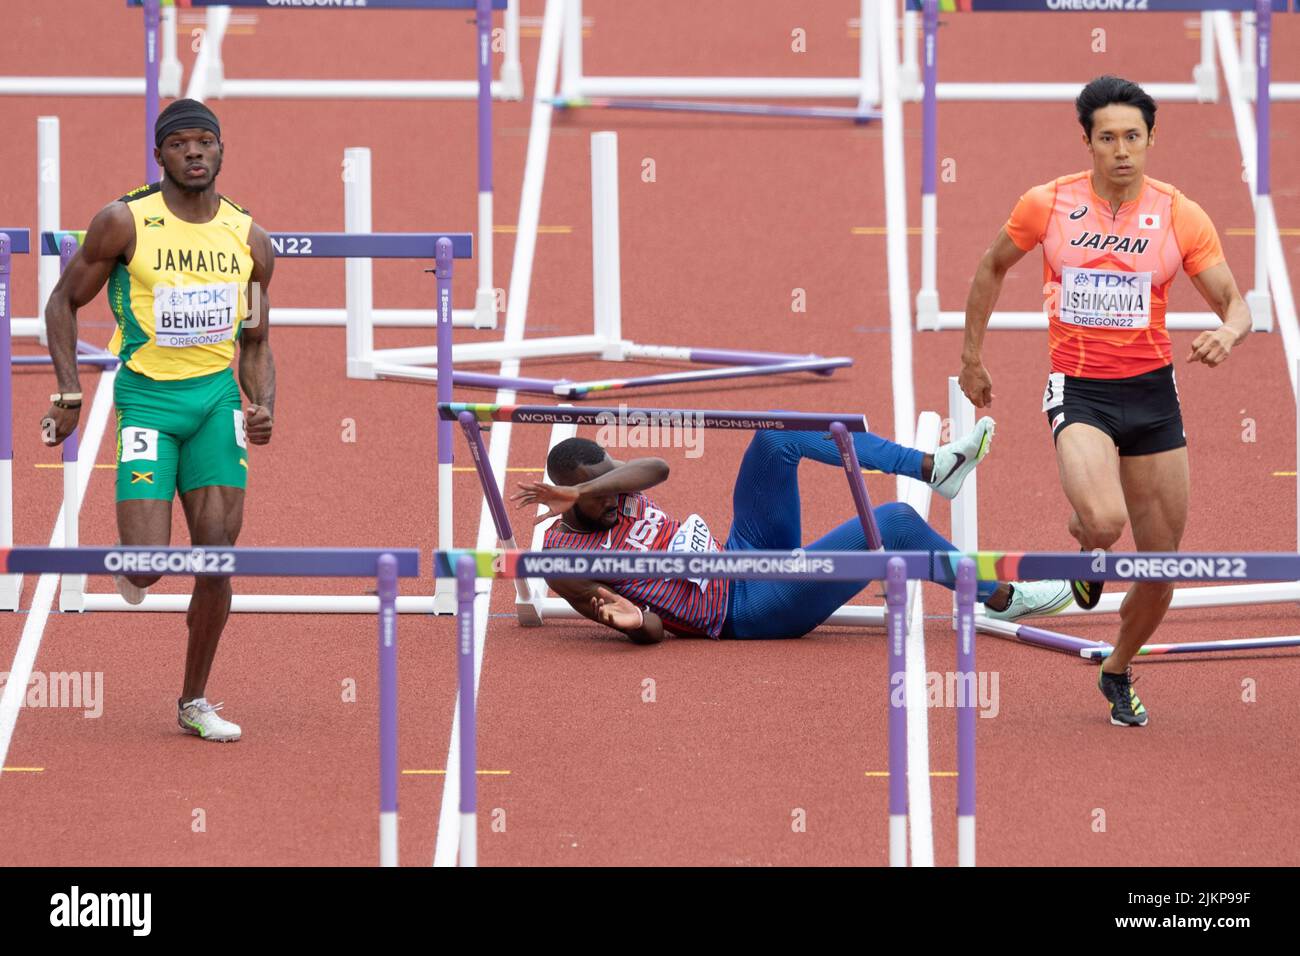 Daniel Roberts (USA) crashes into the 8th hurdle in his first round heat of the 110 meter hurdles during the morning session on day 2 of the World Ath Stock Photo